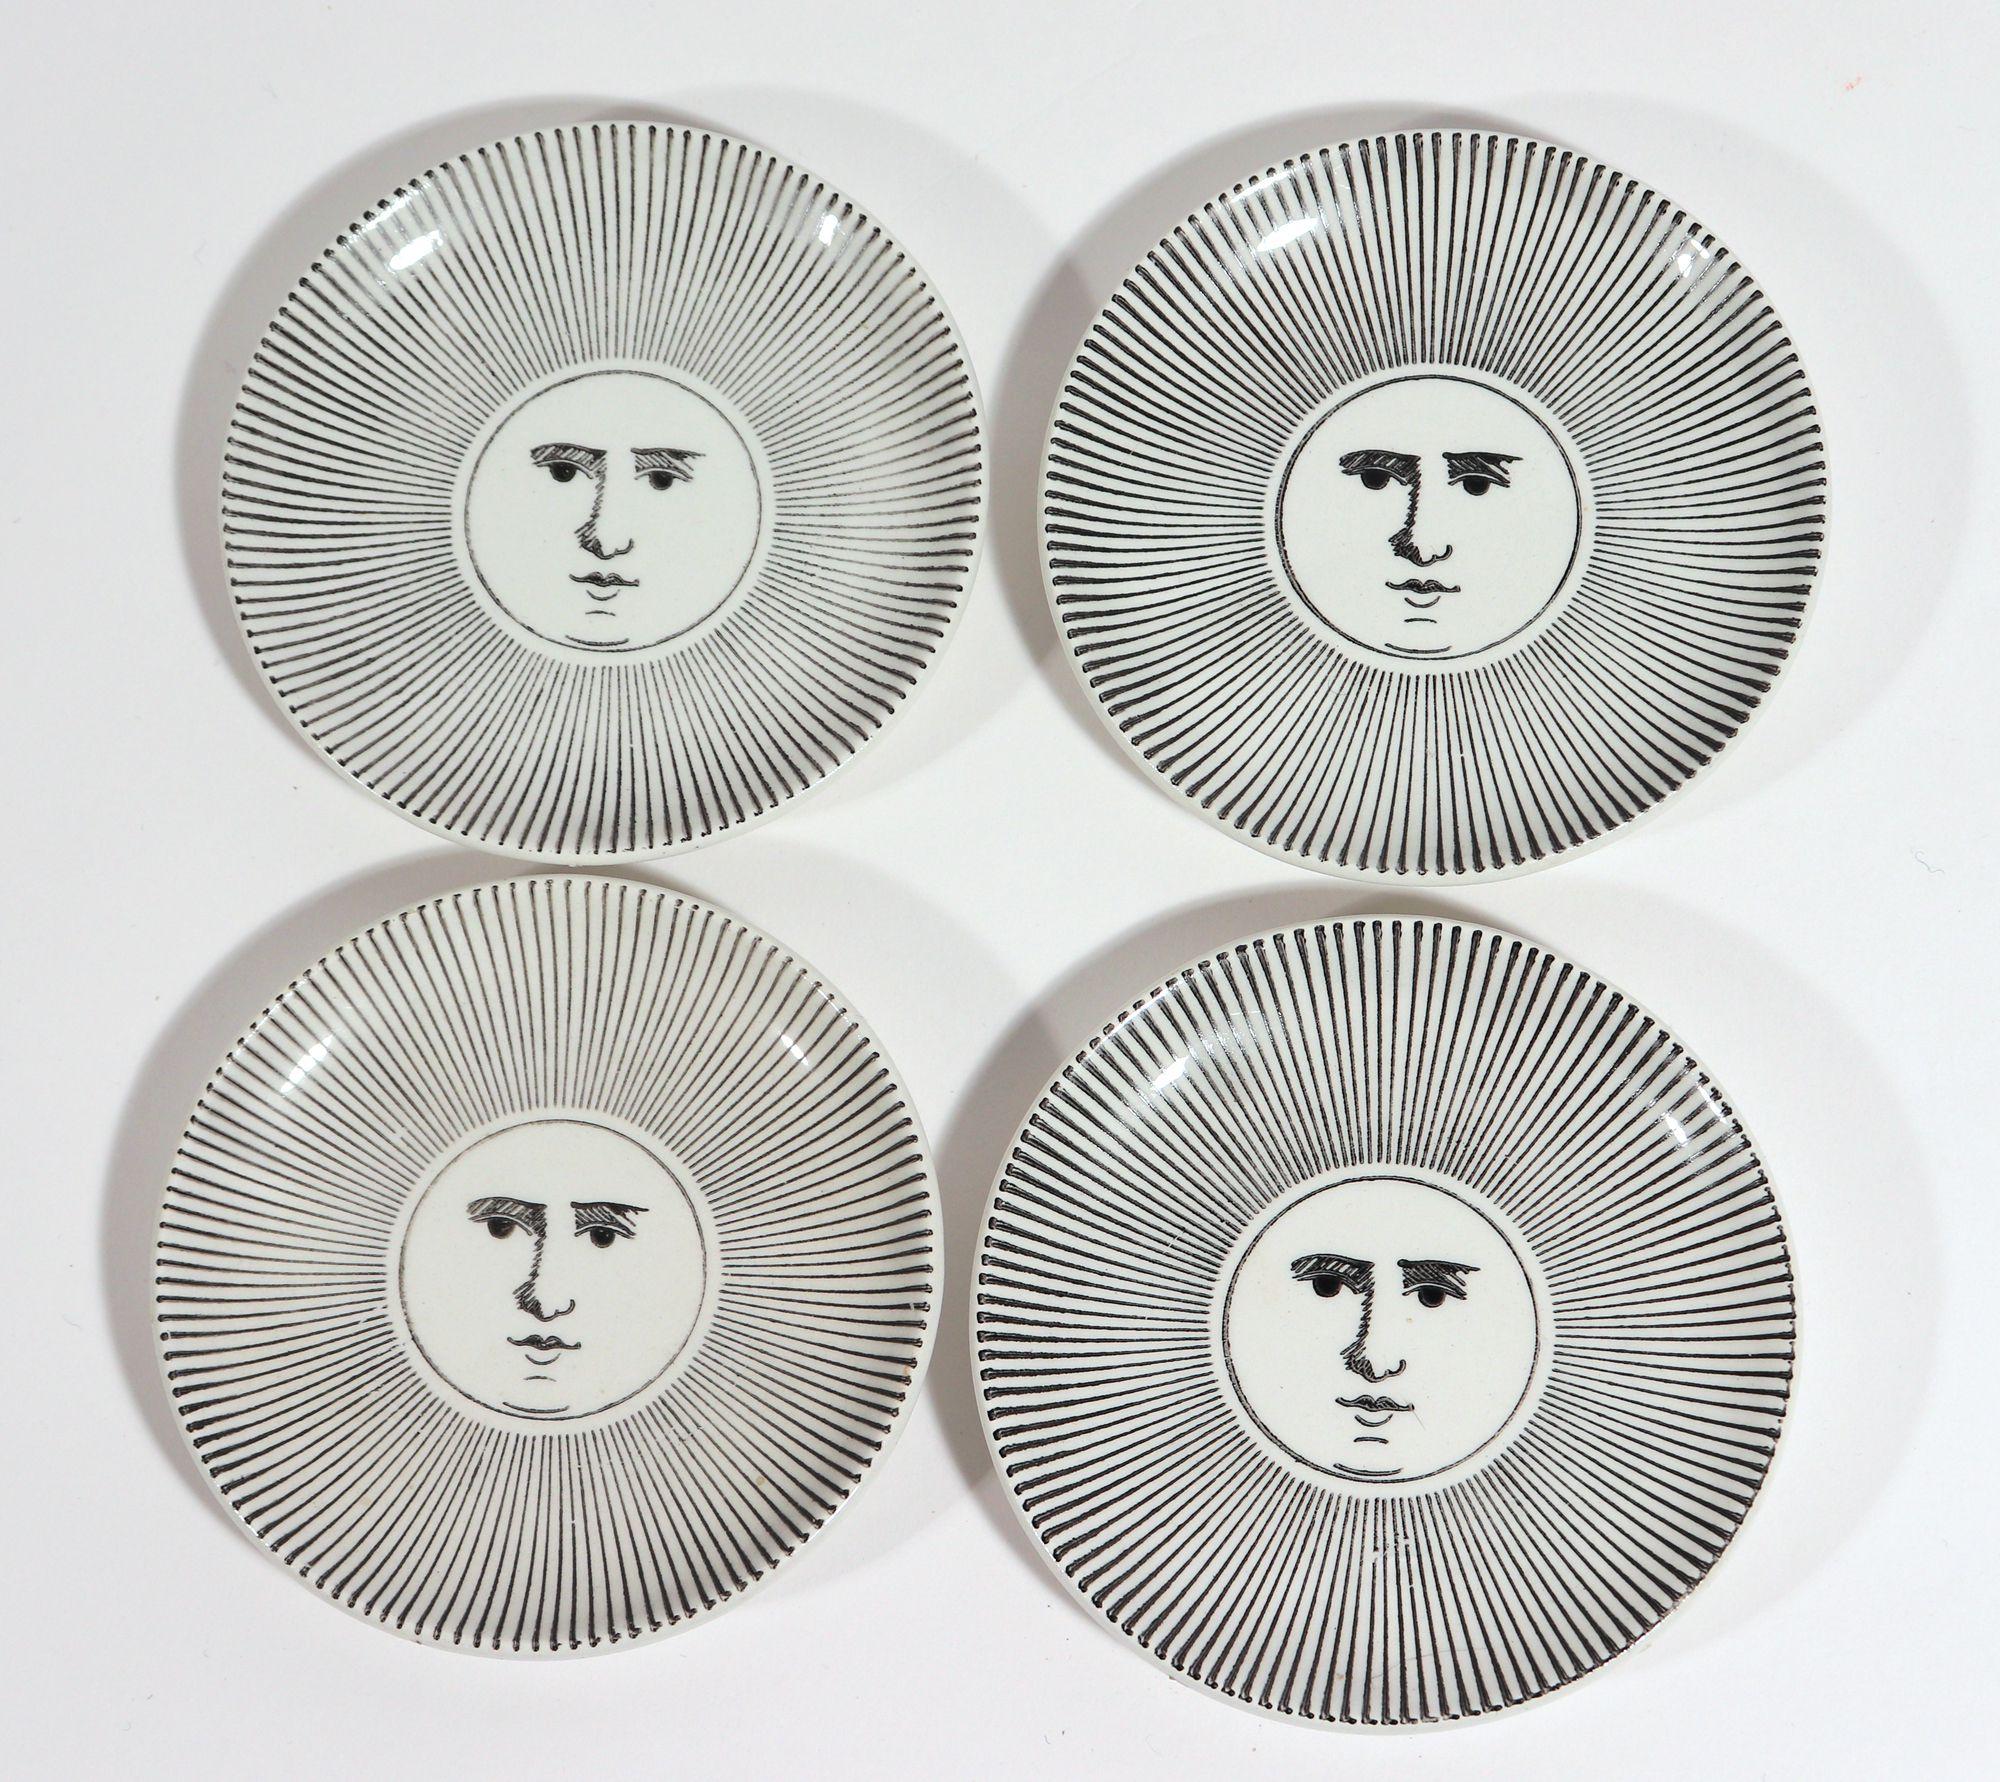 Piero Fornasetti ceramic small coasters Soli E Lune- Sun and Moon,
1950s

The small circular complete set of black and white ceramic coasters depict eight moon designs of the same design with a central Luna face and an outer band of rays. This